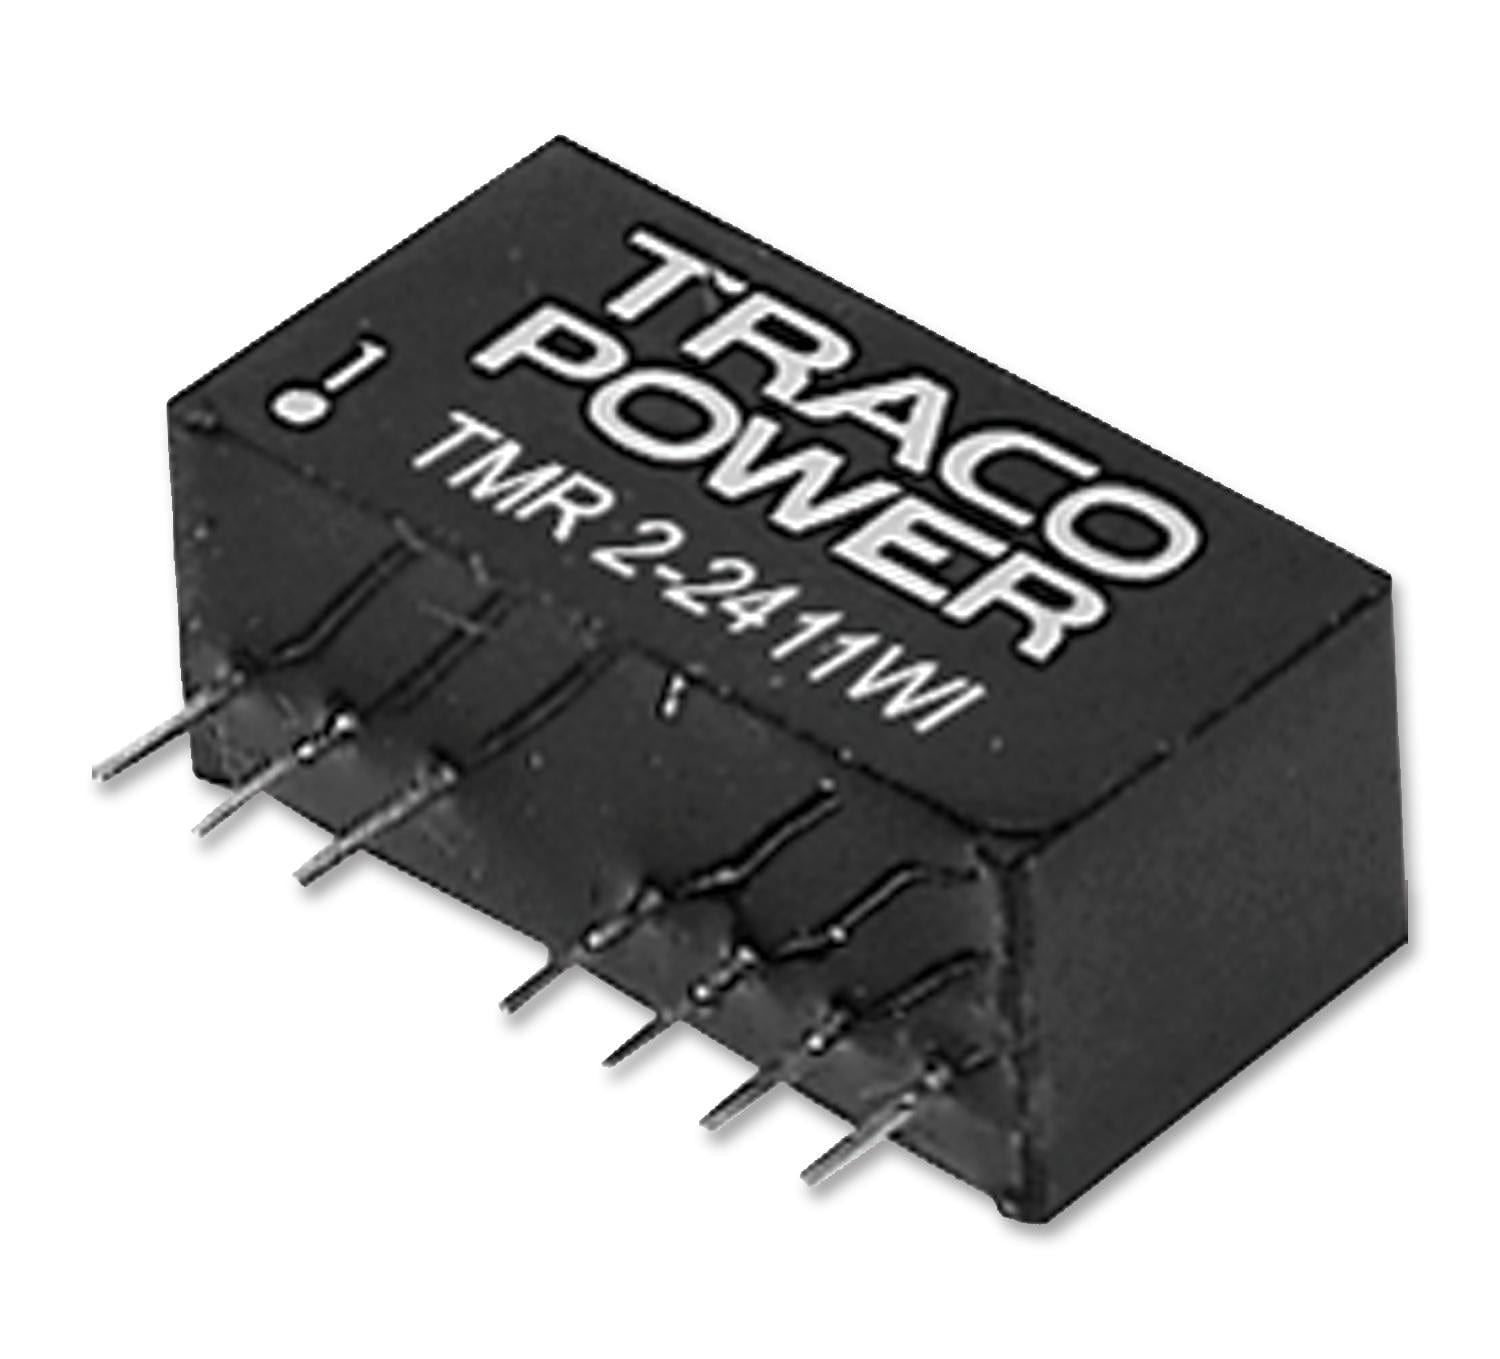 TRACO POWER Isolated Board Mount TMR 2-2411WI CONVERTER, DC TO DC, 5V, 2W TRACO POWER 1284245 TMR 2-2411WI